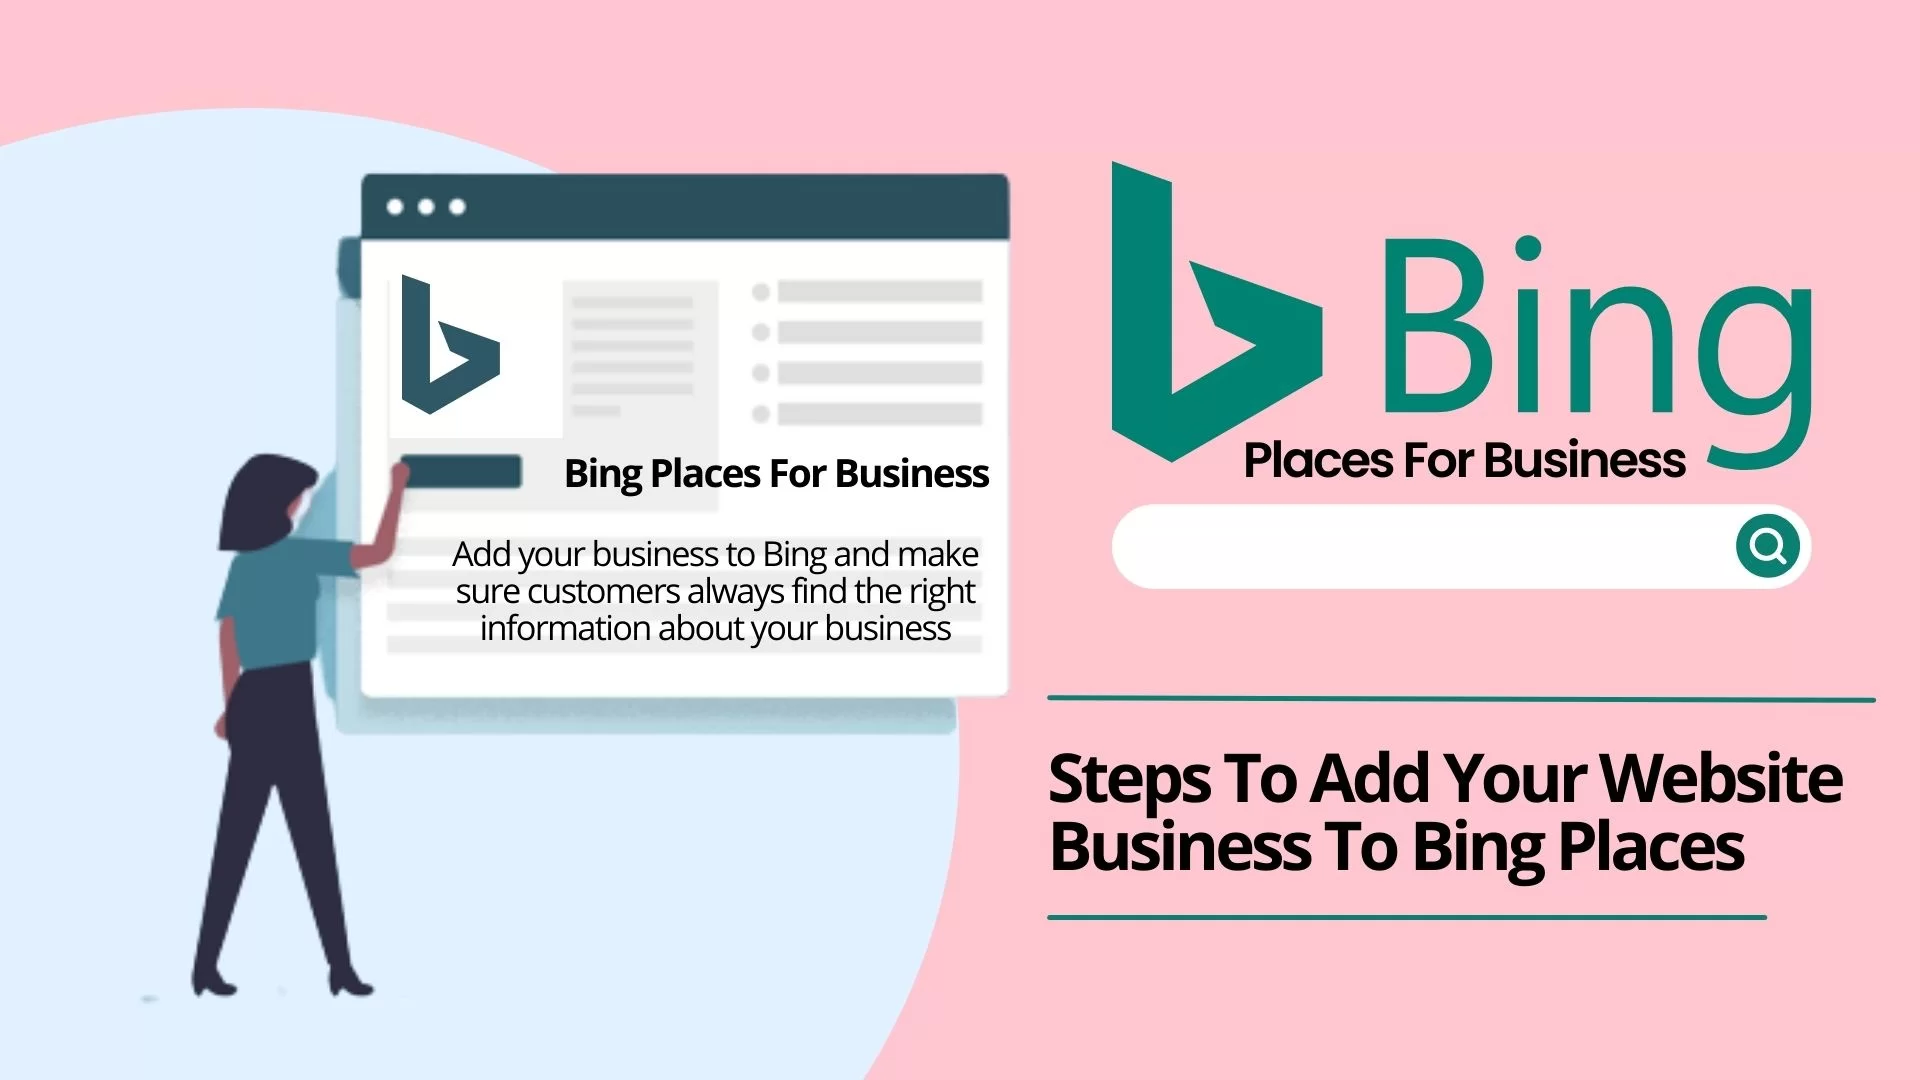 How Bing Places For Business Works